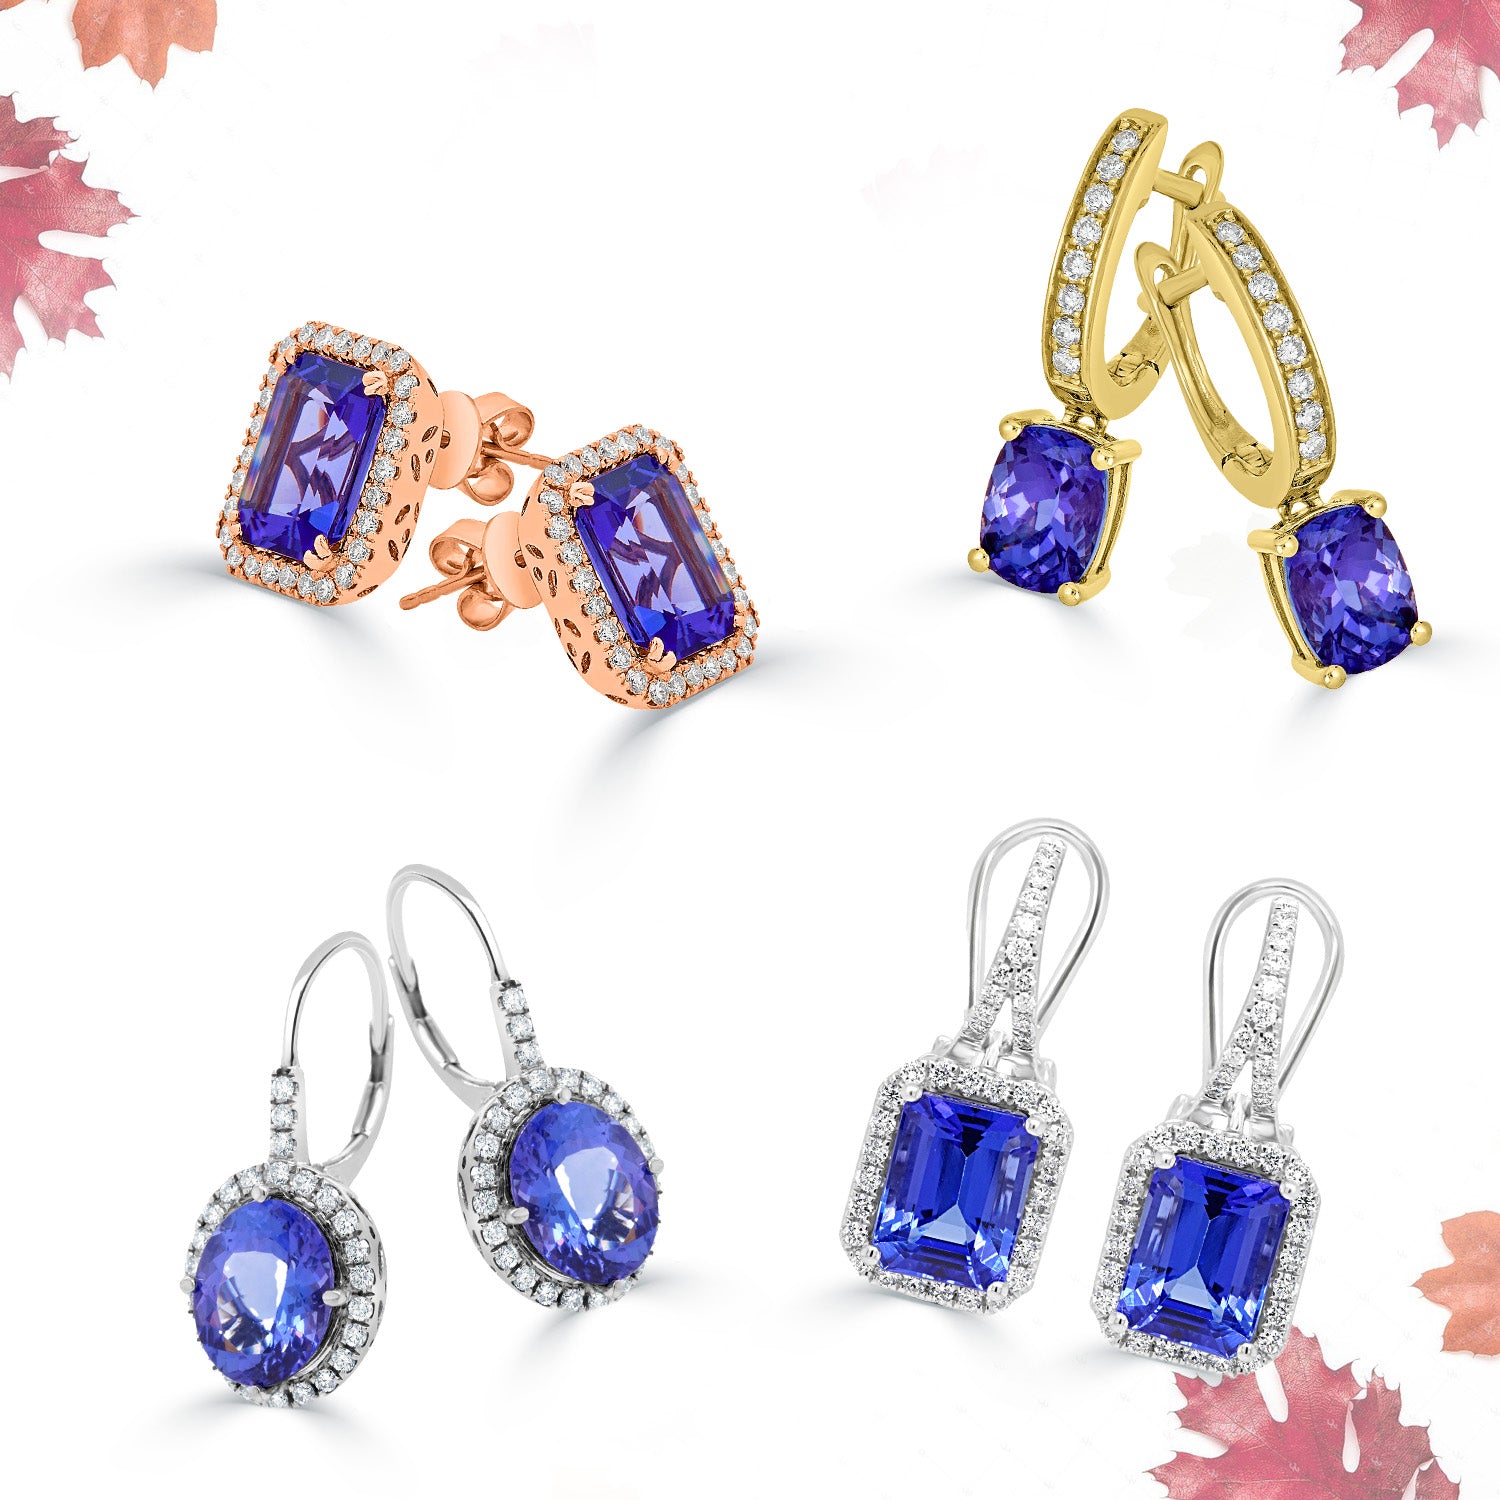 Your winter wardrobe absolutely needs these Tanzanite earrings